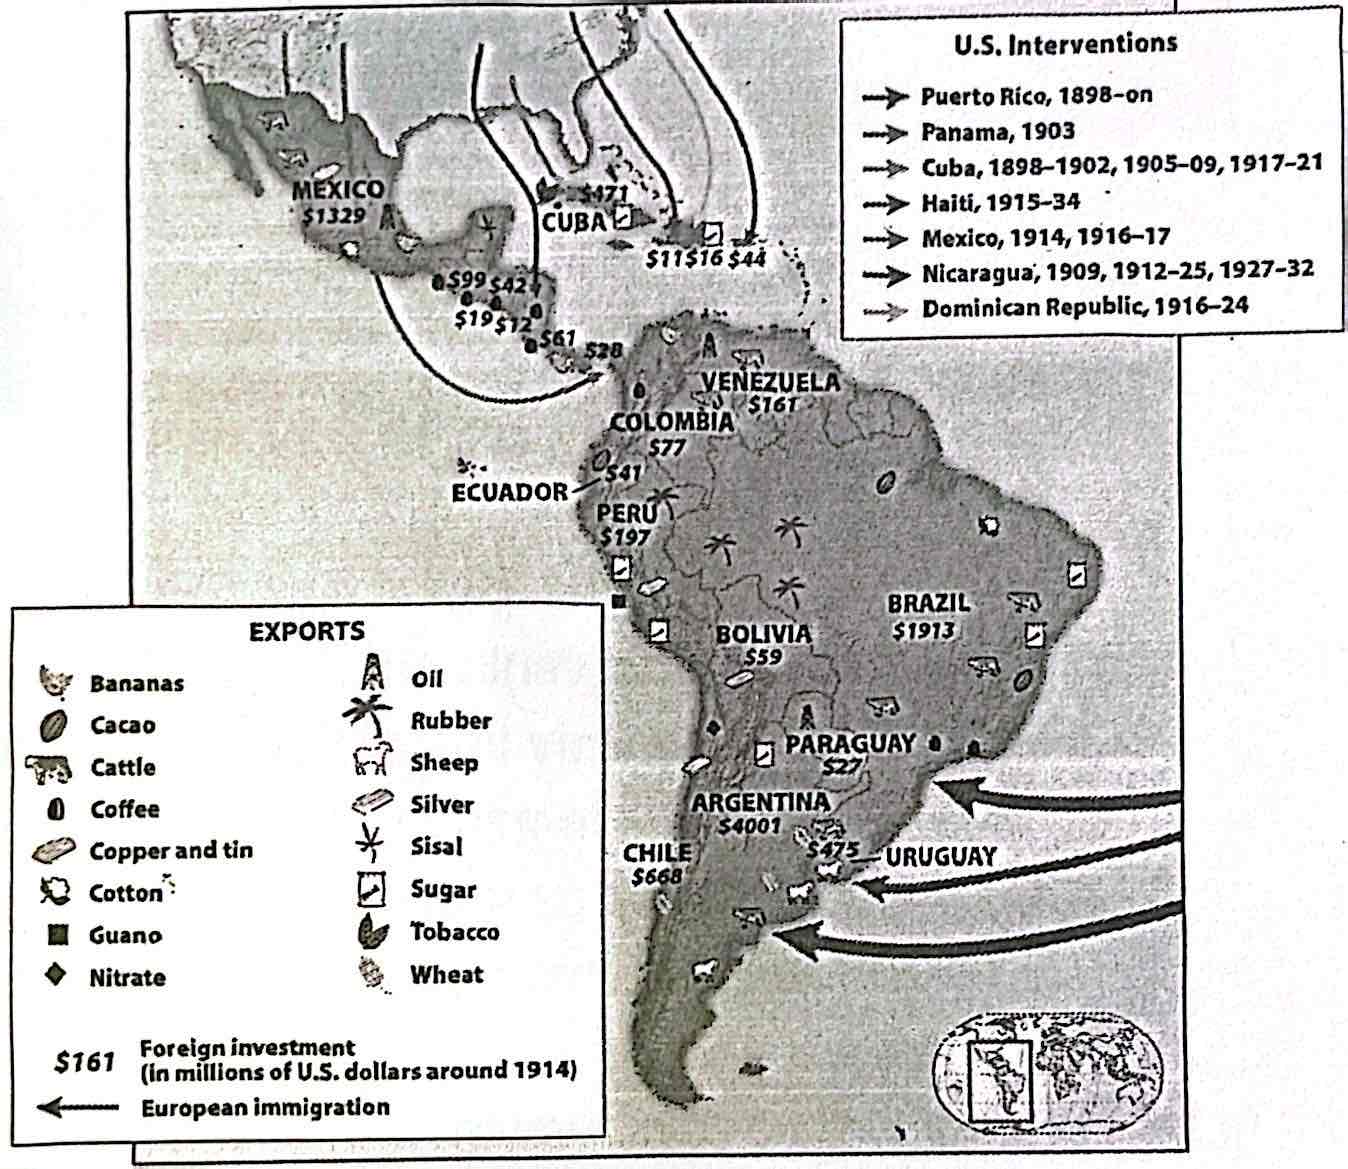 <p><strong>8-10.</strong> Which of the following benefited from the U.S. military interventions depicted in the map?</p><p>a) United Fruit Company<br>b) Standard Oil Company<br>c) General Motors<br>d) League of Nations</p>